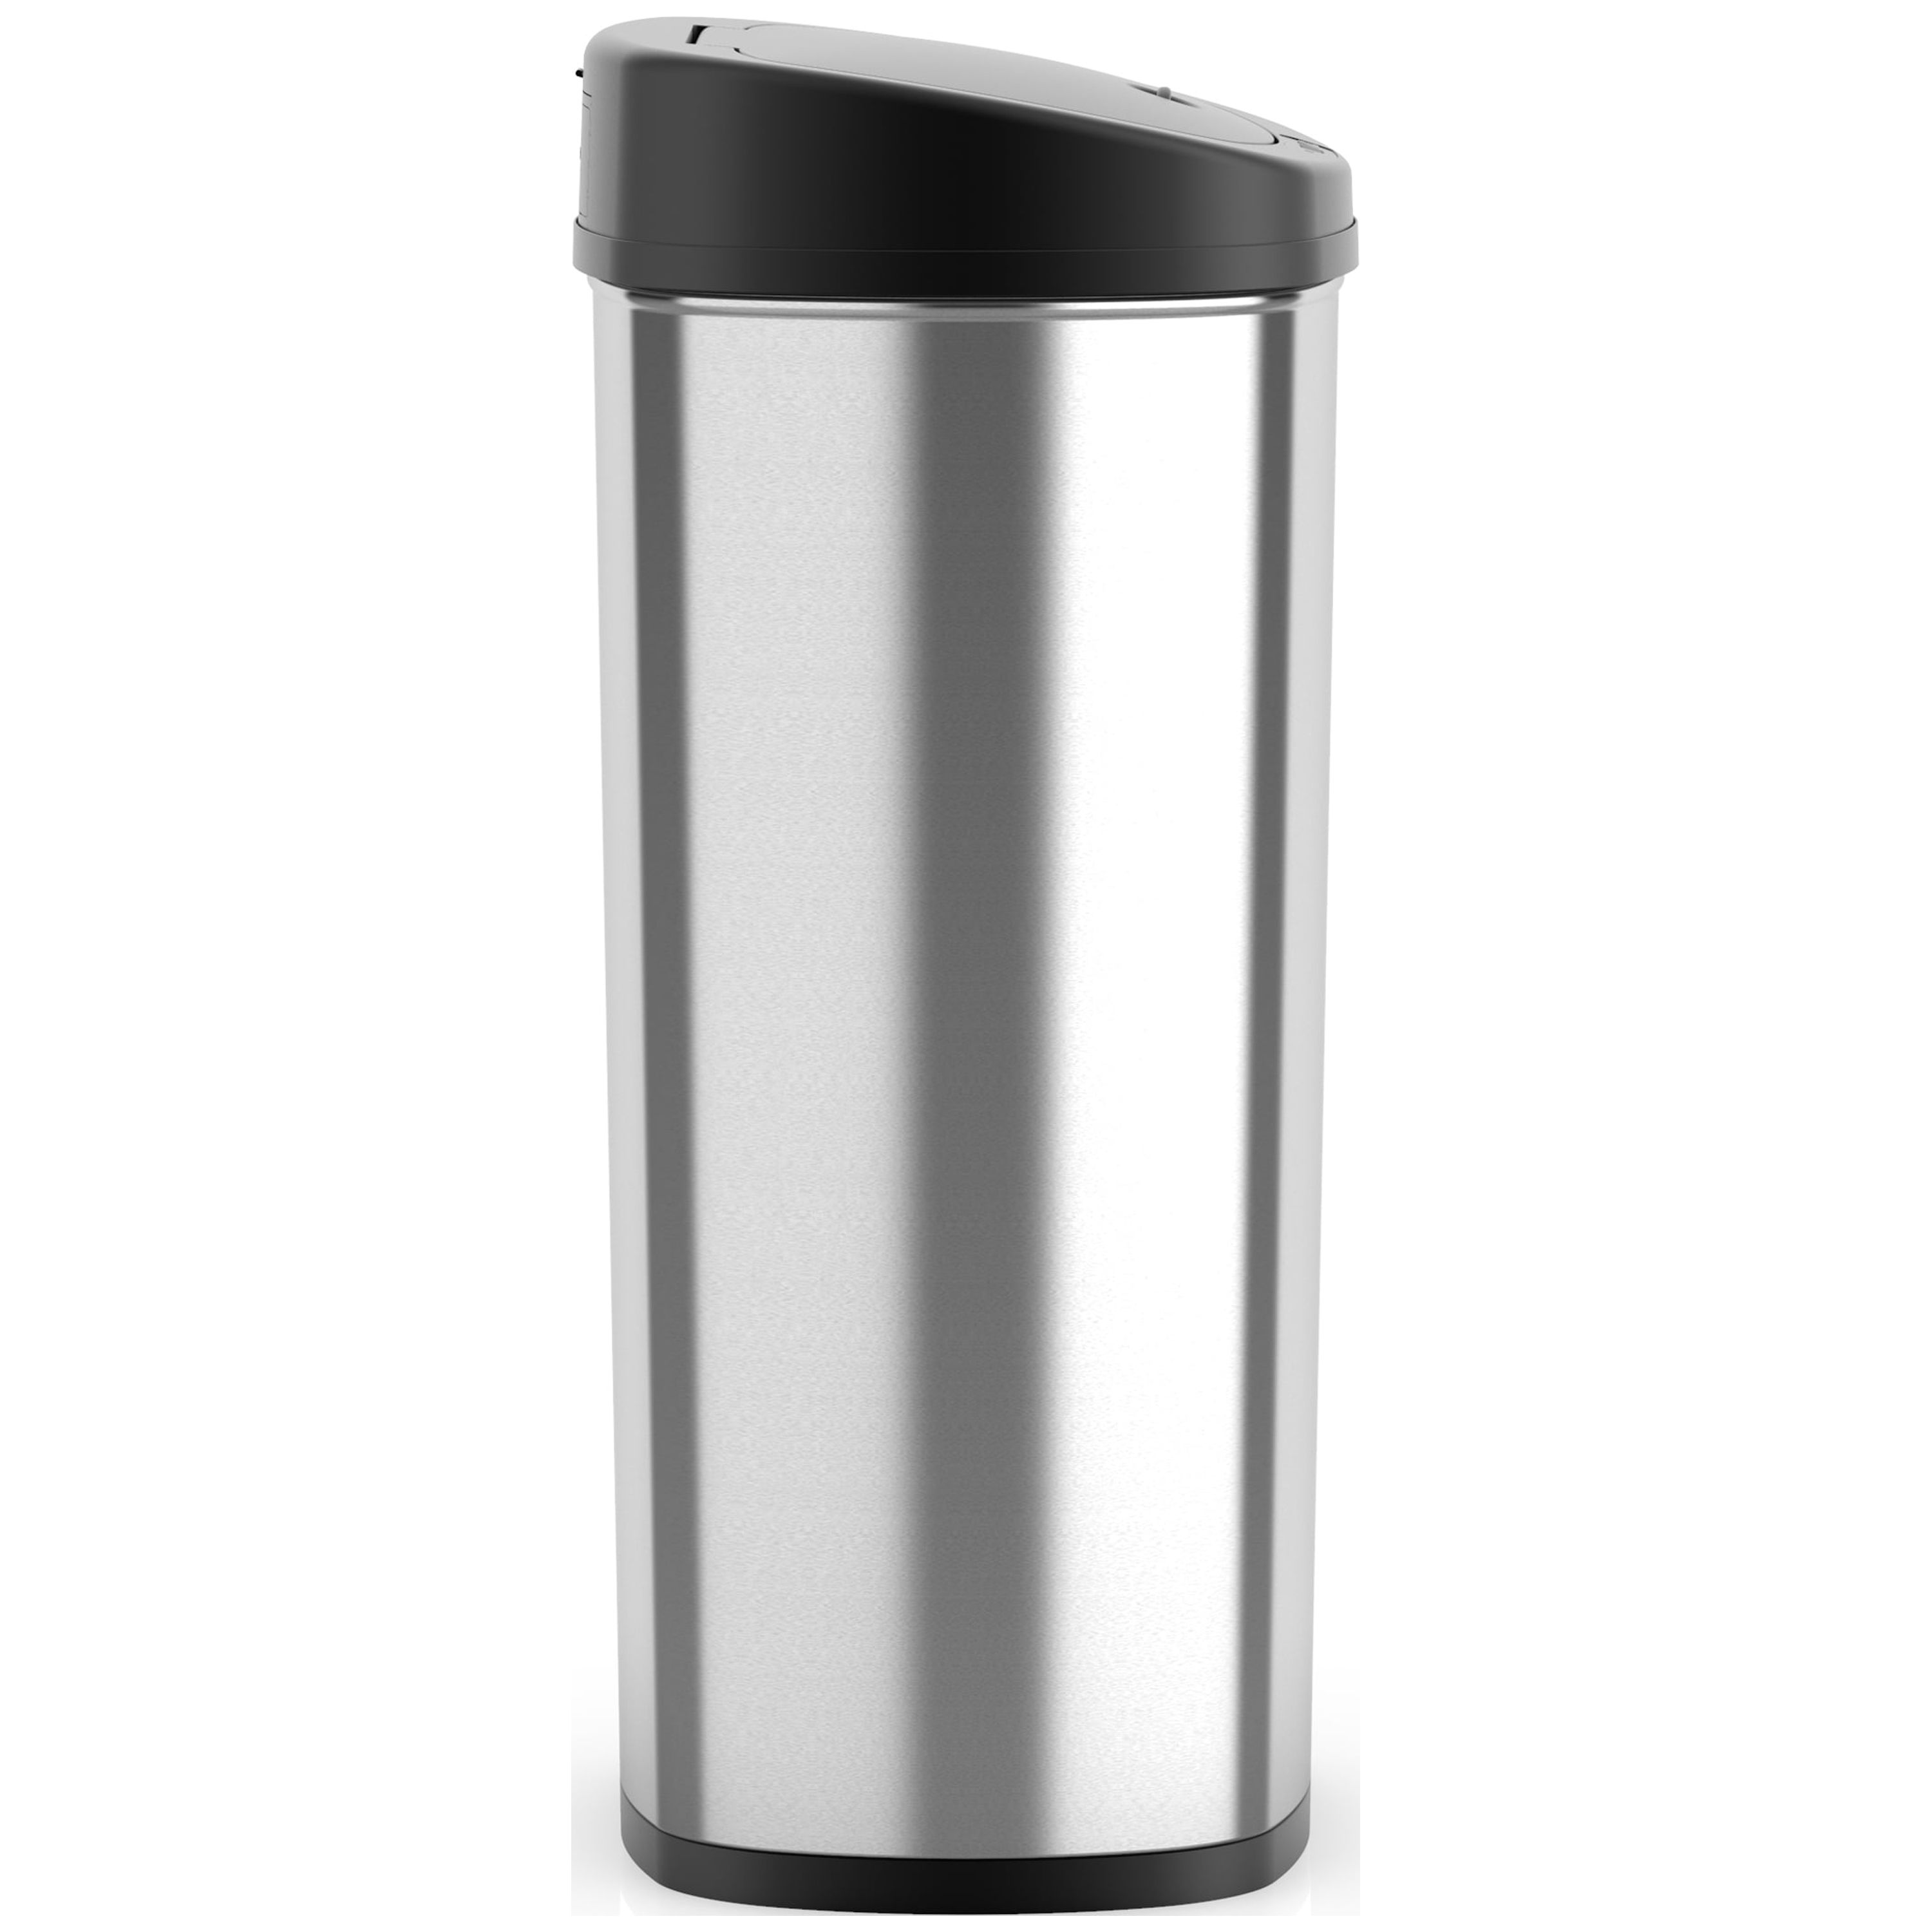 Mainstays 13.2 Gallon Trash Can, Motion Sensor Kitchen Trash Can, Stainless Steel - image 4 of 12